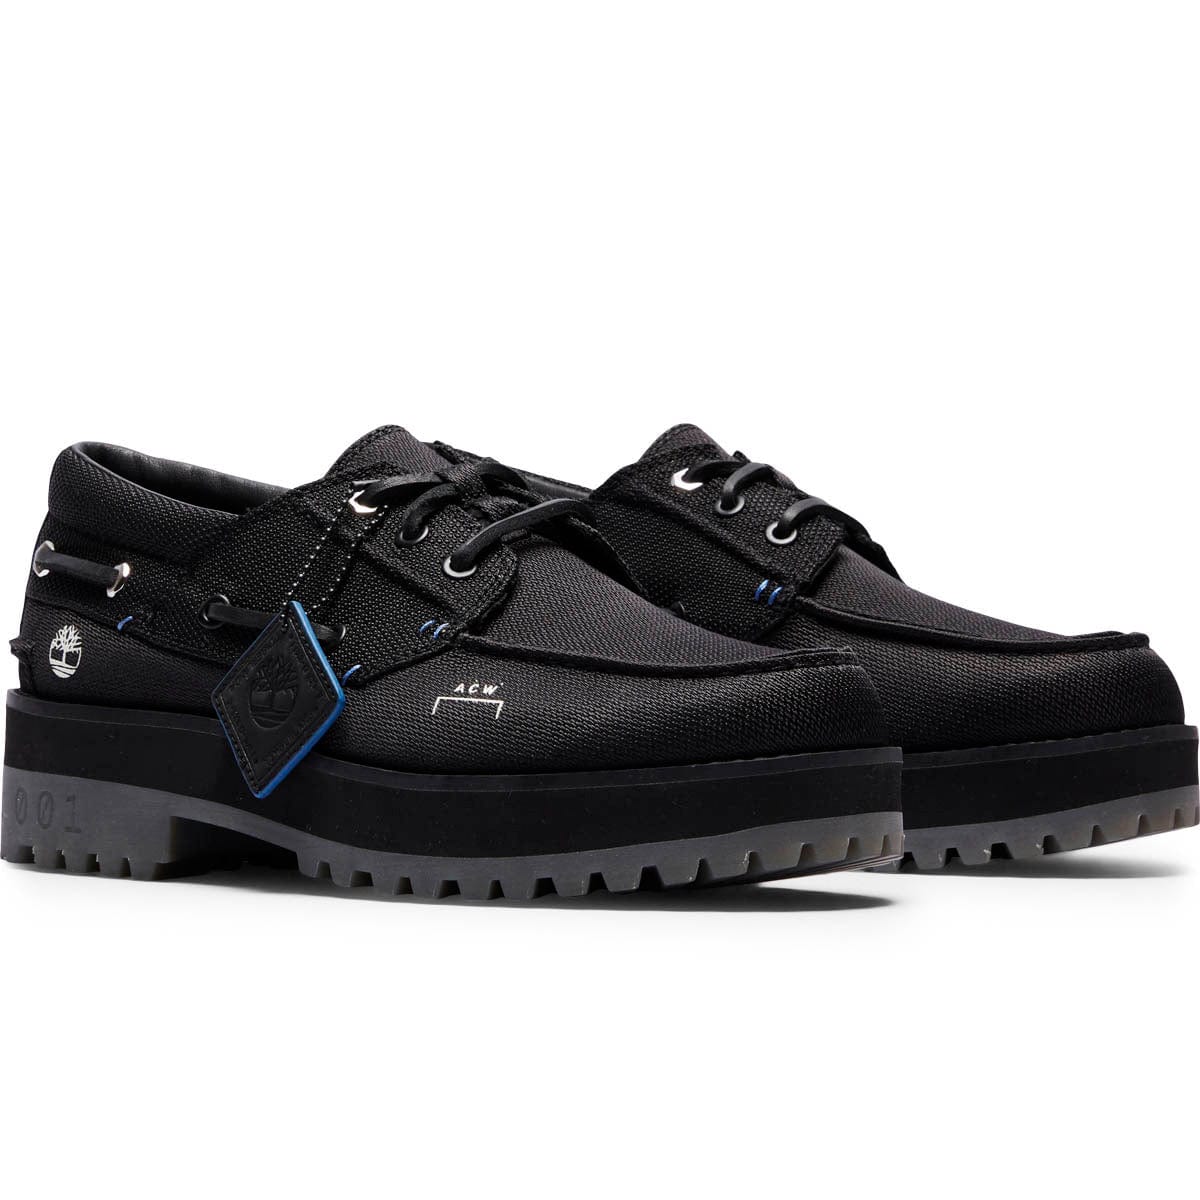 A COLD WALL* Casual X TIMBERLAND 3 EYE LOG BOAT SHOE